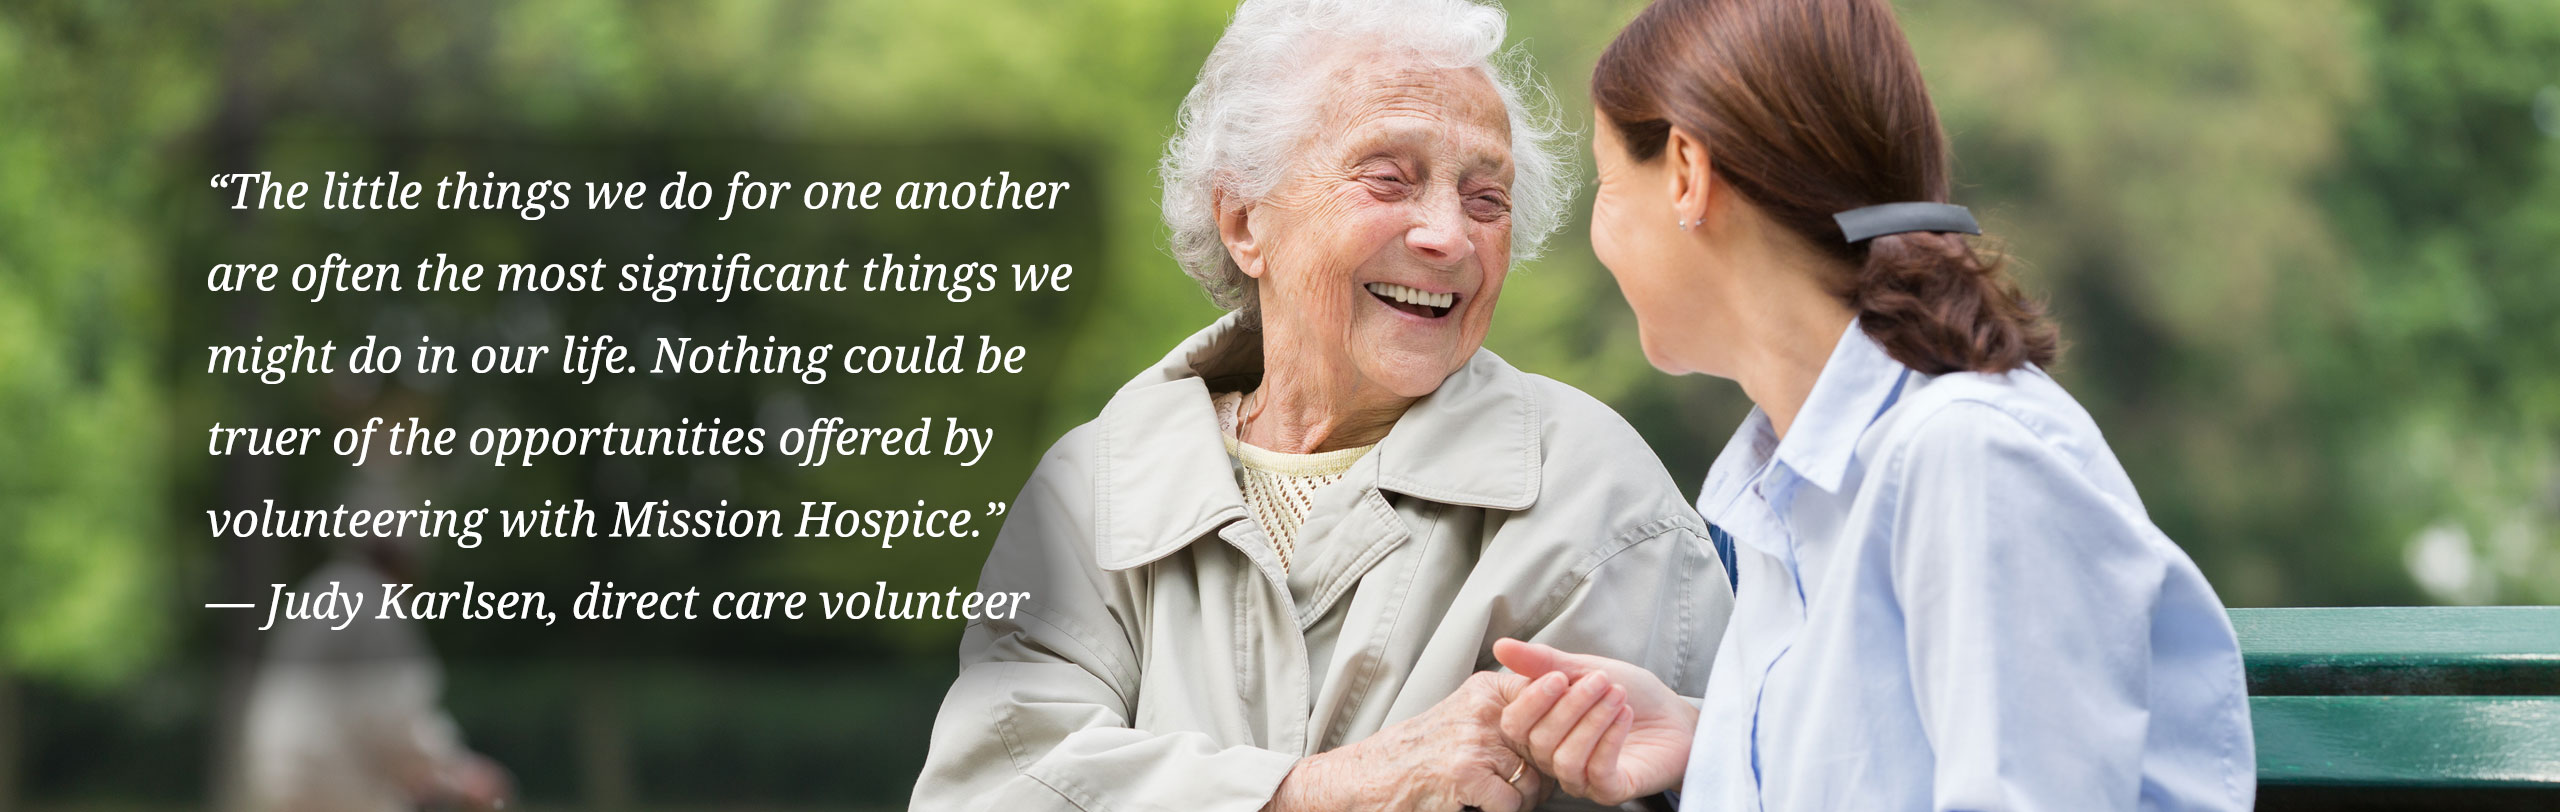 The little things we do for one another are often the most significant things we might do in our life. Nothing could be truer of the opportunities offered by volunteering with Mission Hospice.